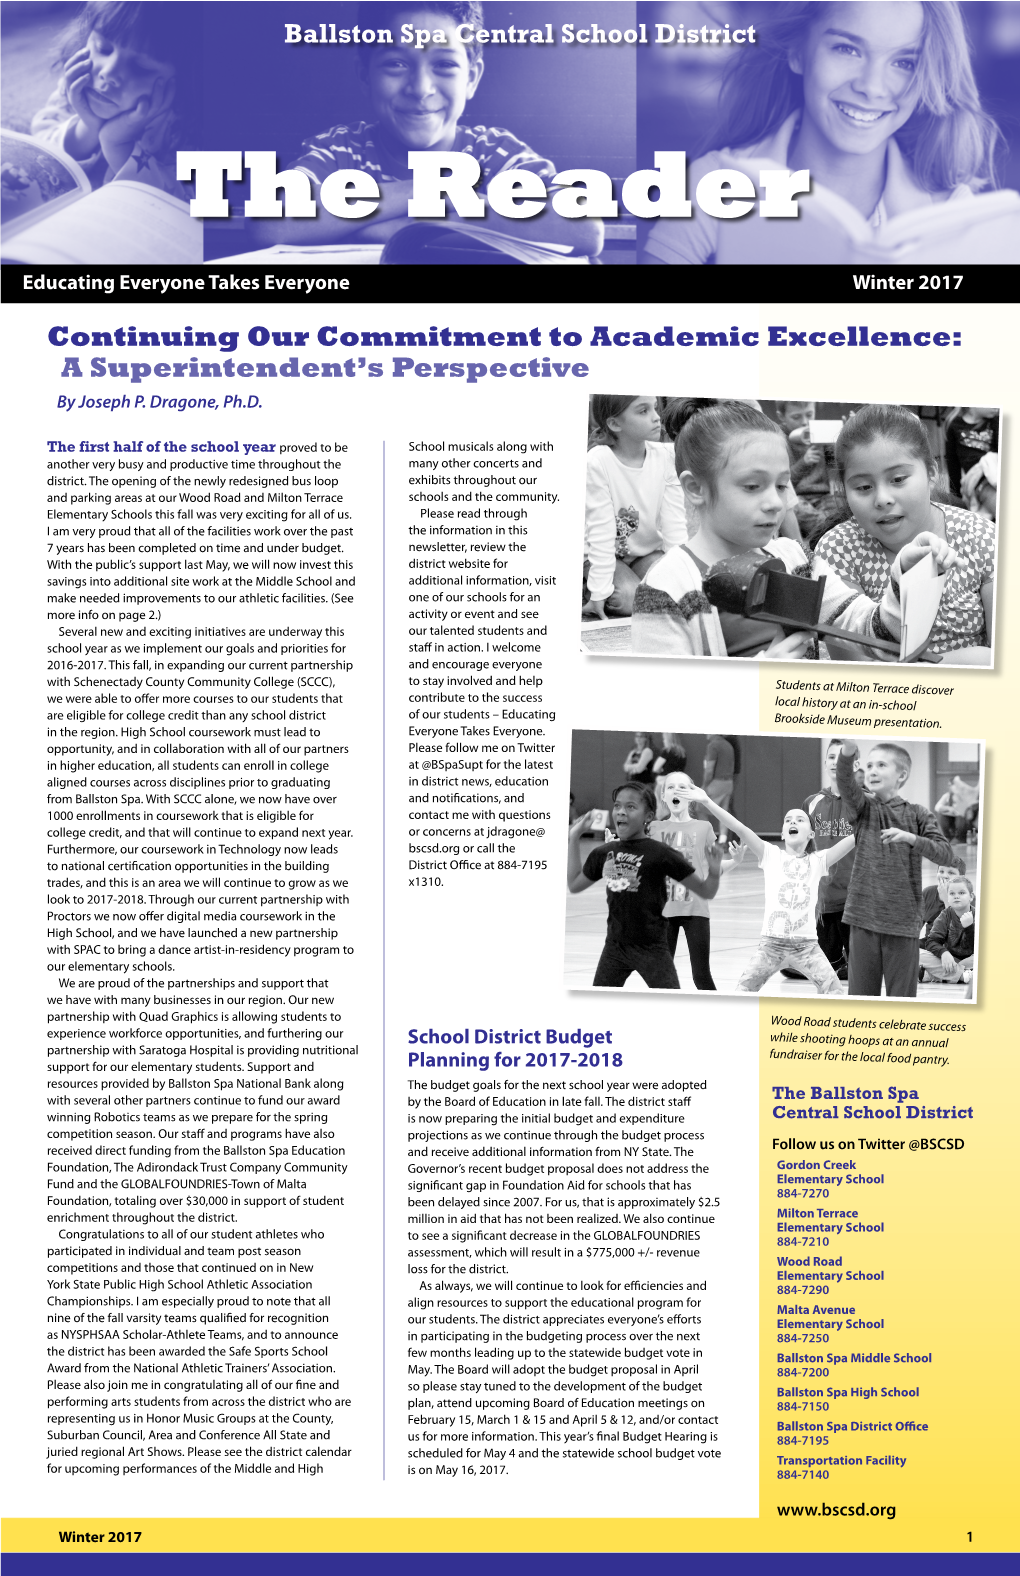 Continuing Our Commitment to Academic Excellence: a Superintendent’S Perspective by Joseph P